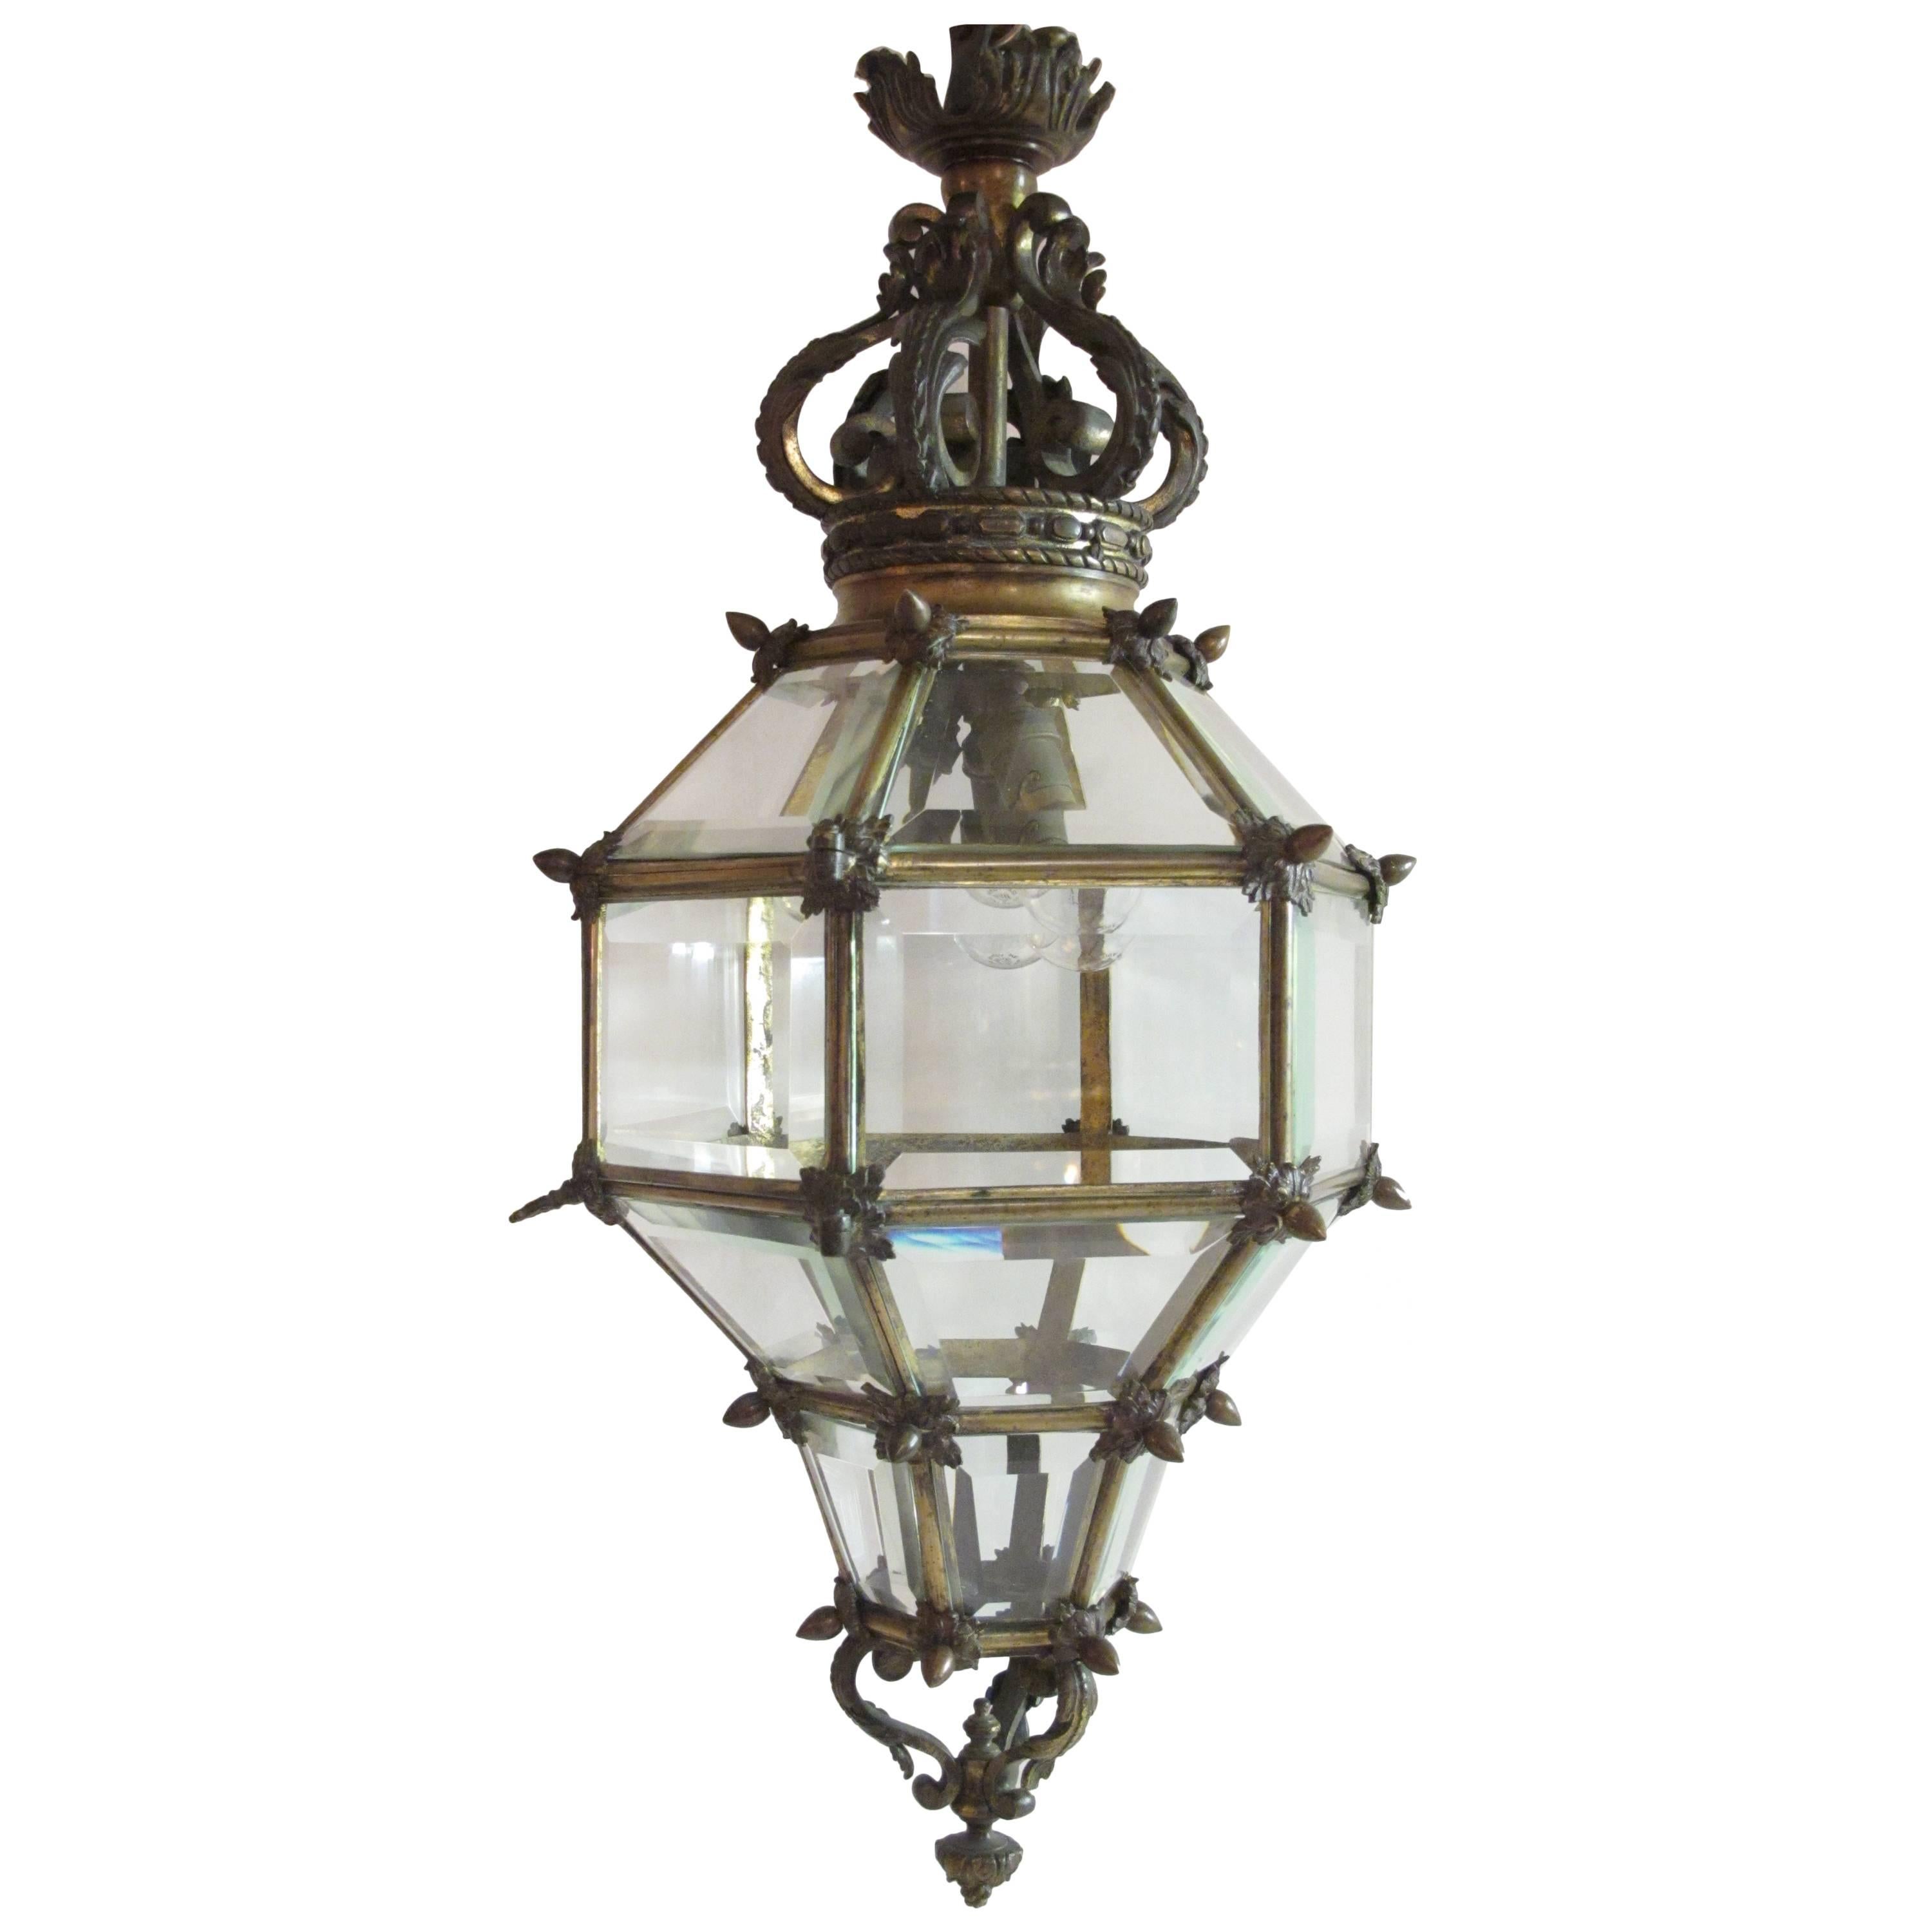 Late 19th Century Bronze and Glass 'Versailles' Hall Lantern